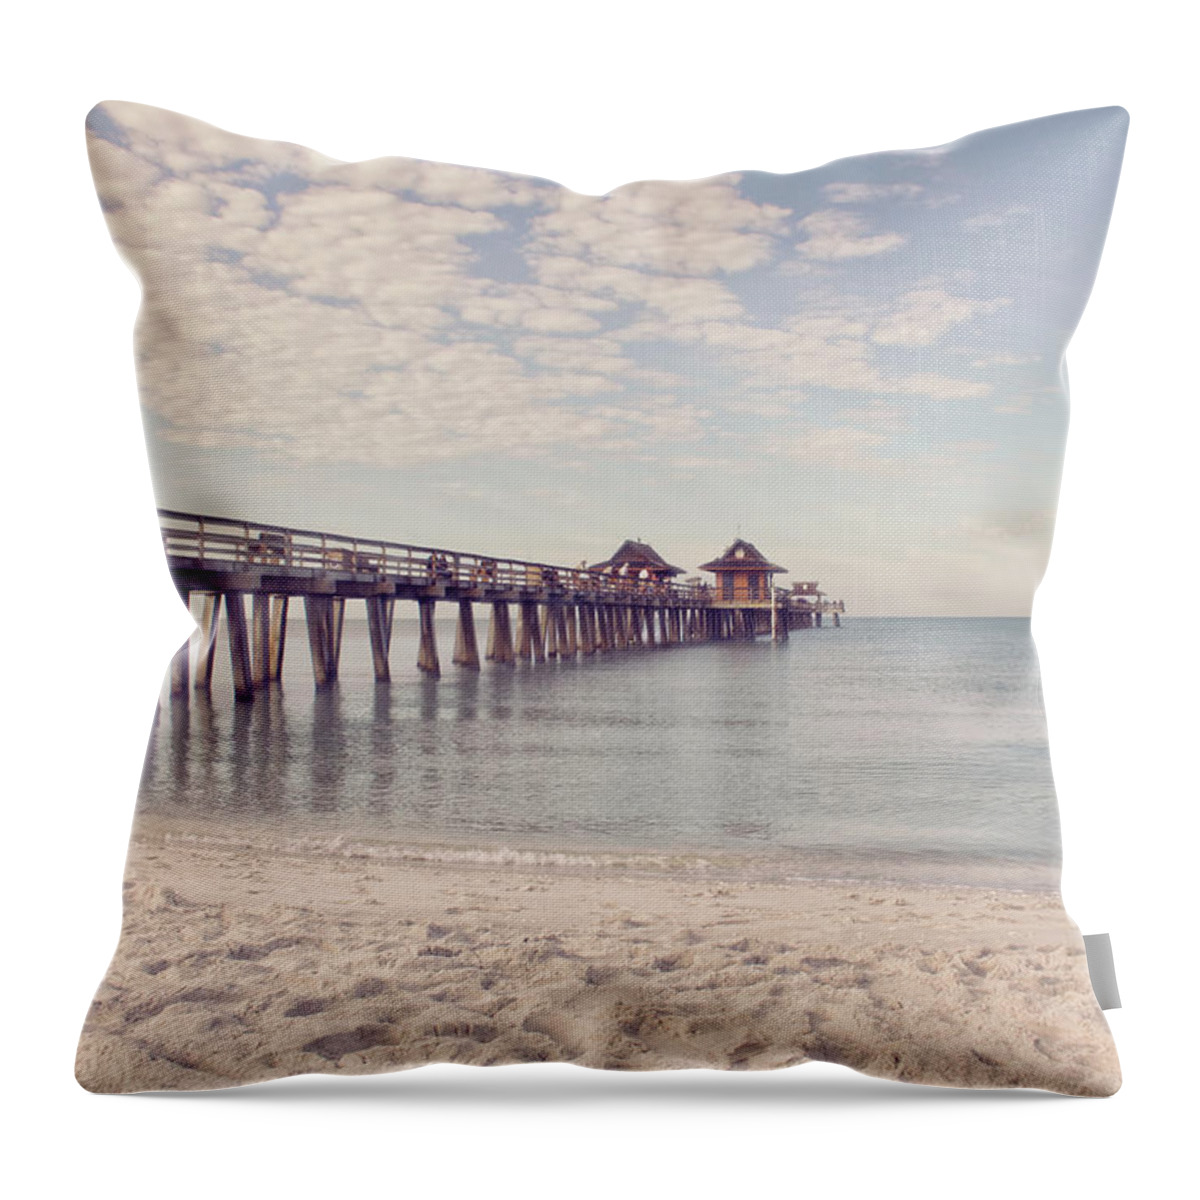 Pier Throw Pillow featuring the photograph An Early Morning - Naples Pier by Kim Hojnacki